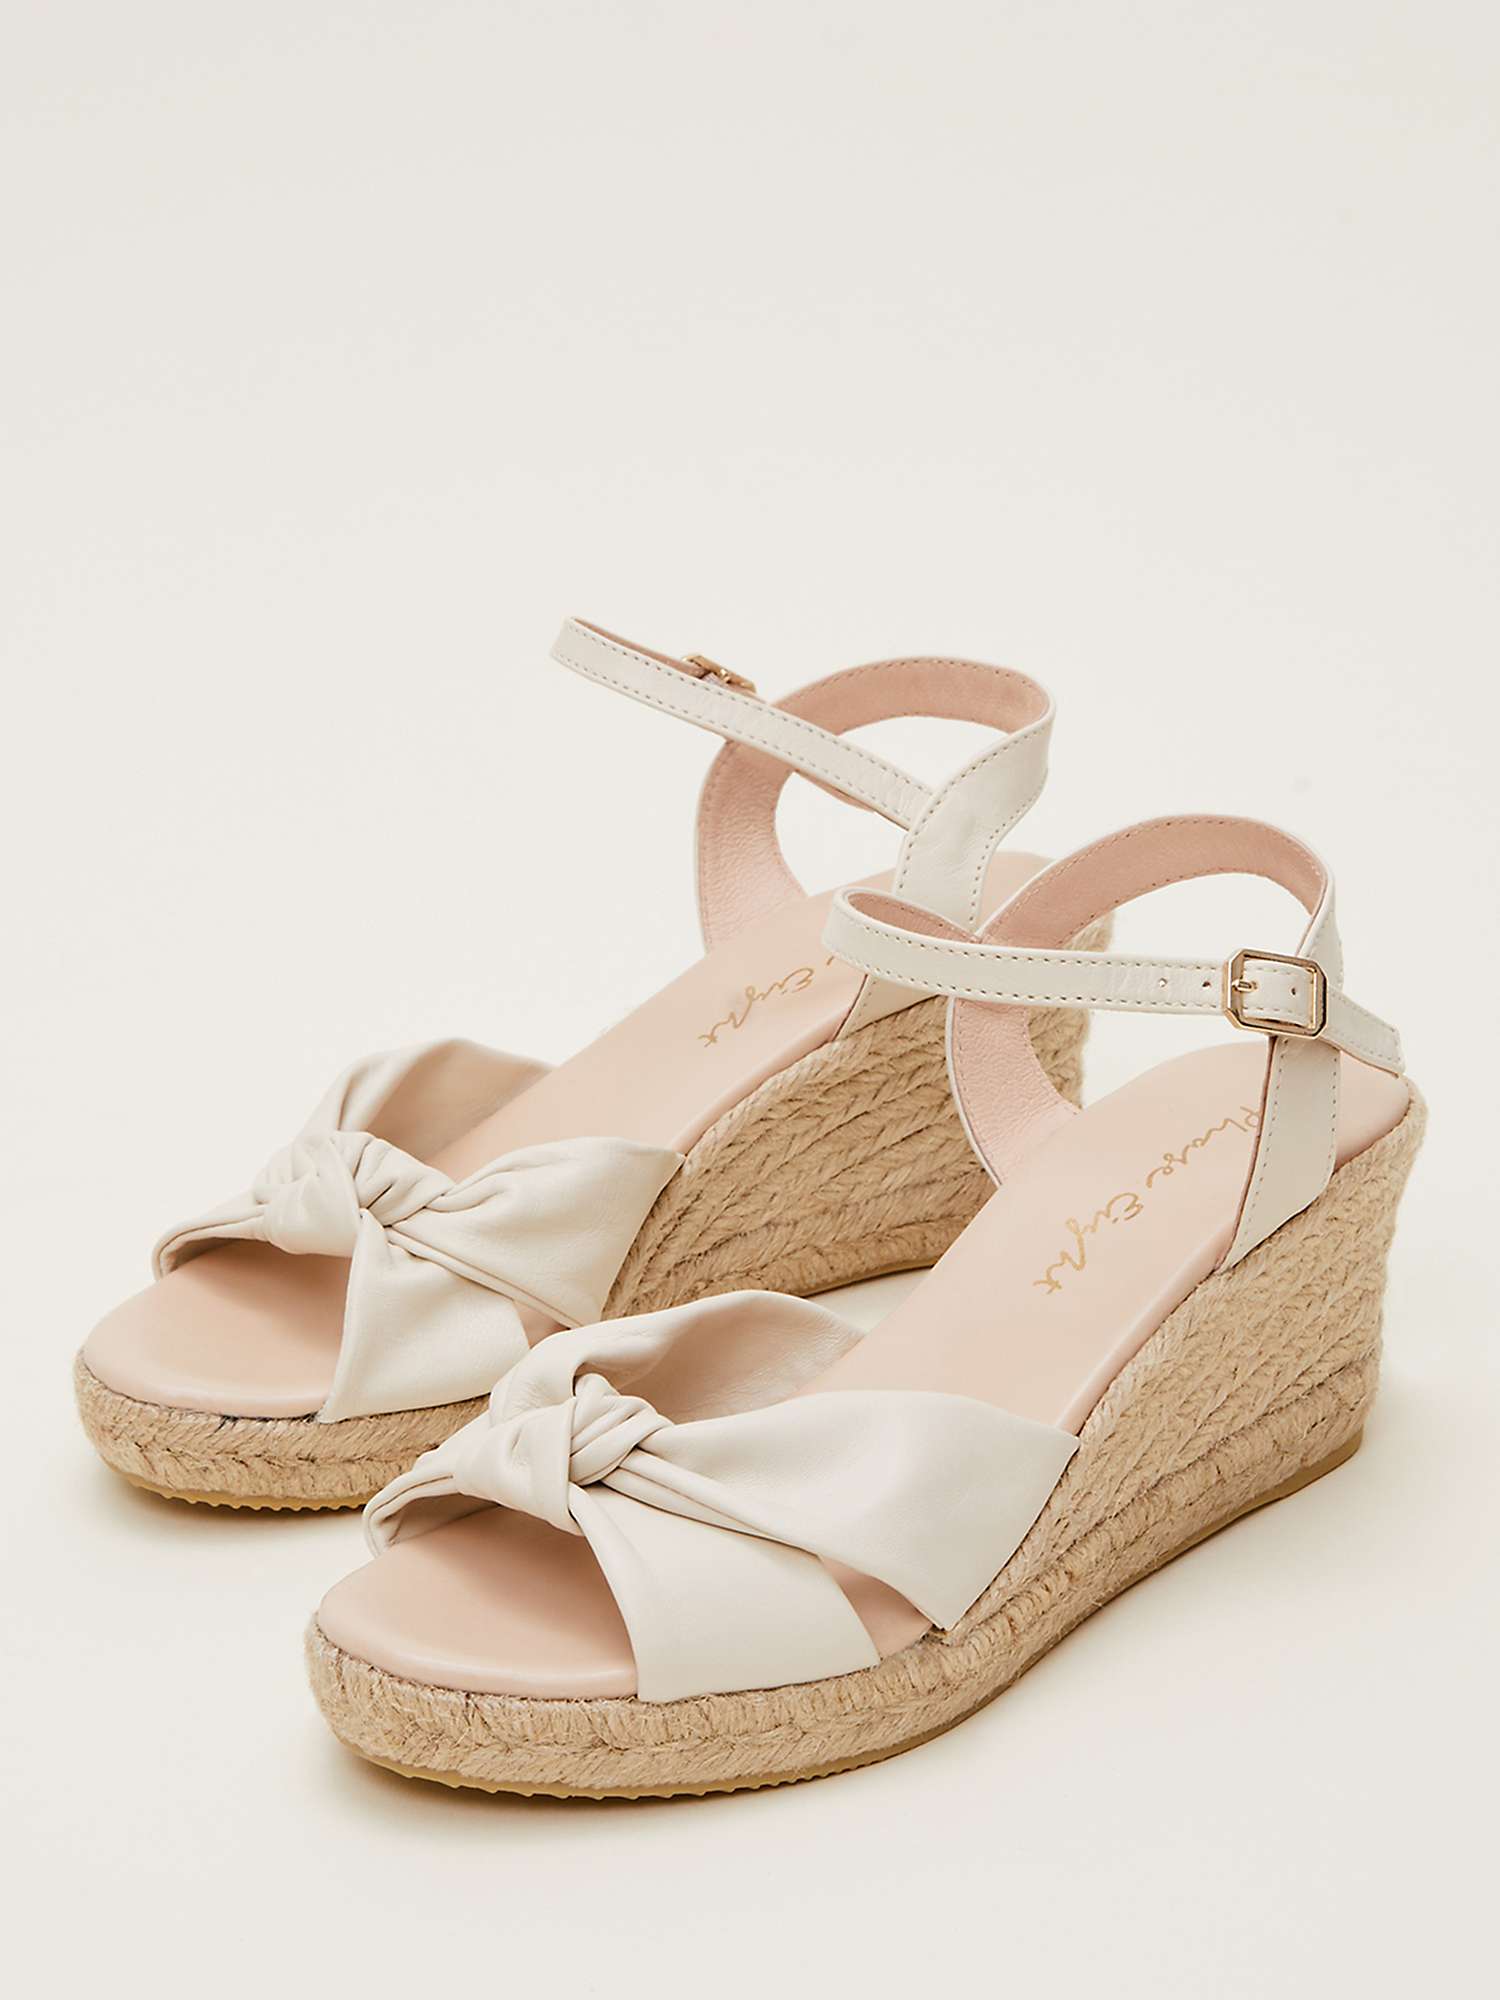 Phase Eight Leather Knot Front Espadrille Shoes, Ivory at John Lewis ...